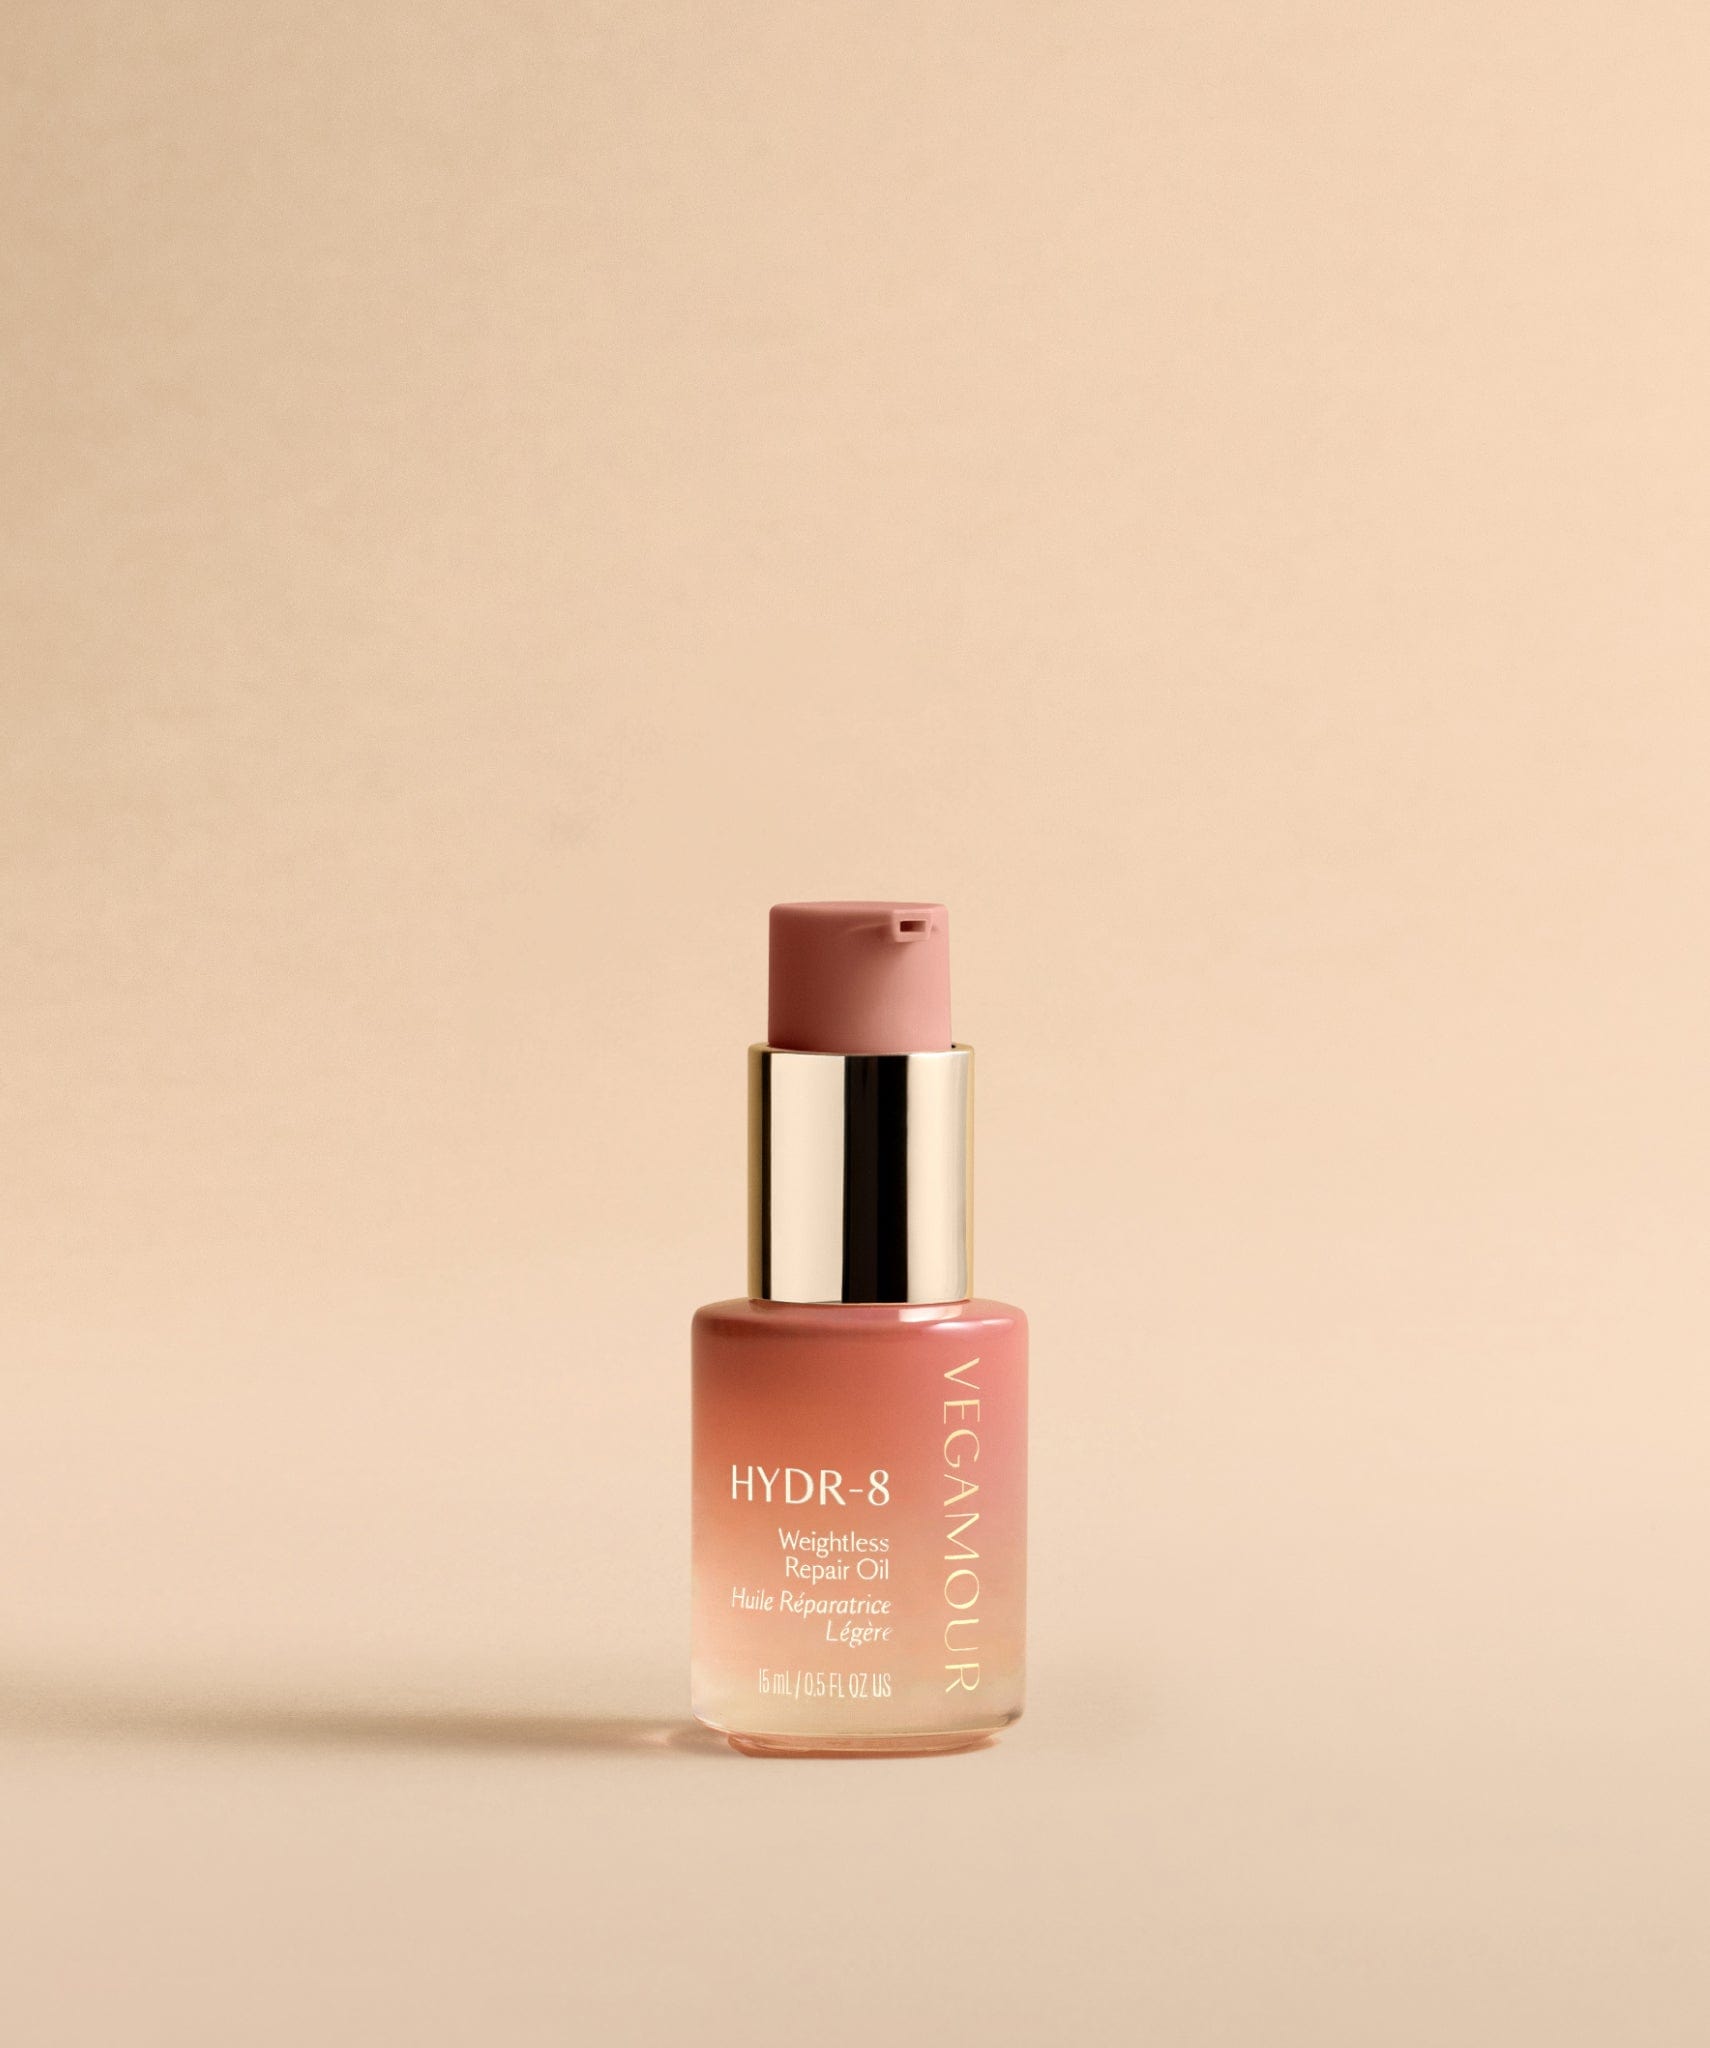 Complimentary: HYDR-8 Weightless Repair Oil Travel Size